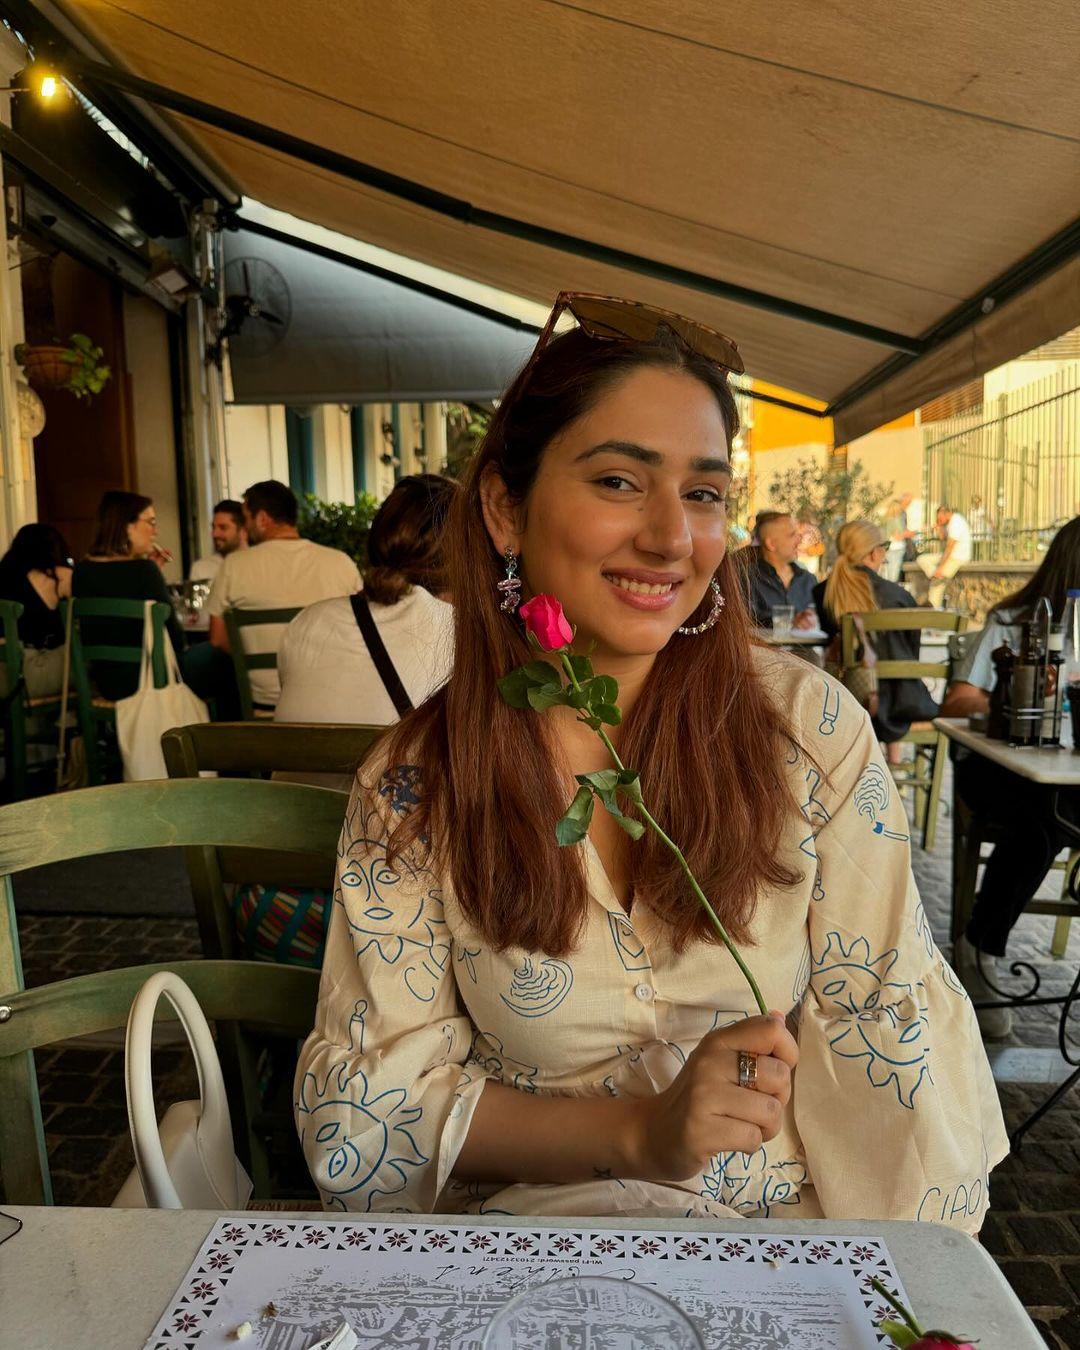 This cute picture has Disha posing with a cute red rose, and it makes our hearts smile